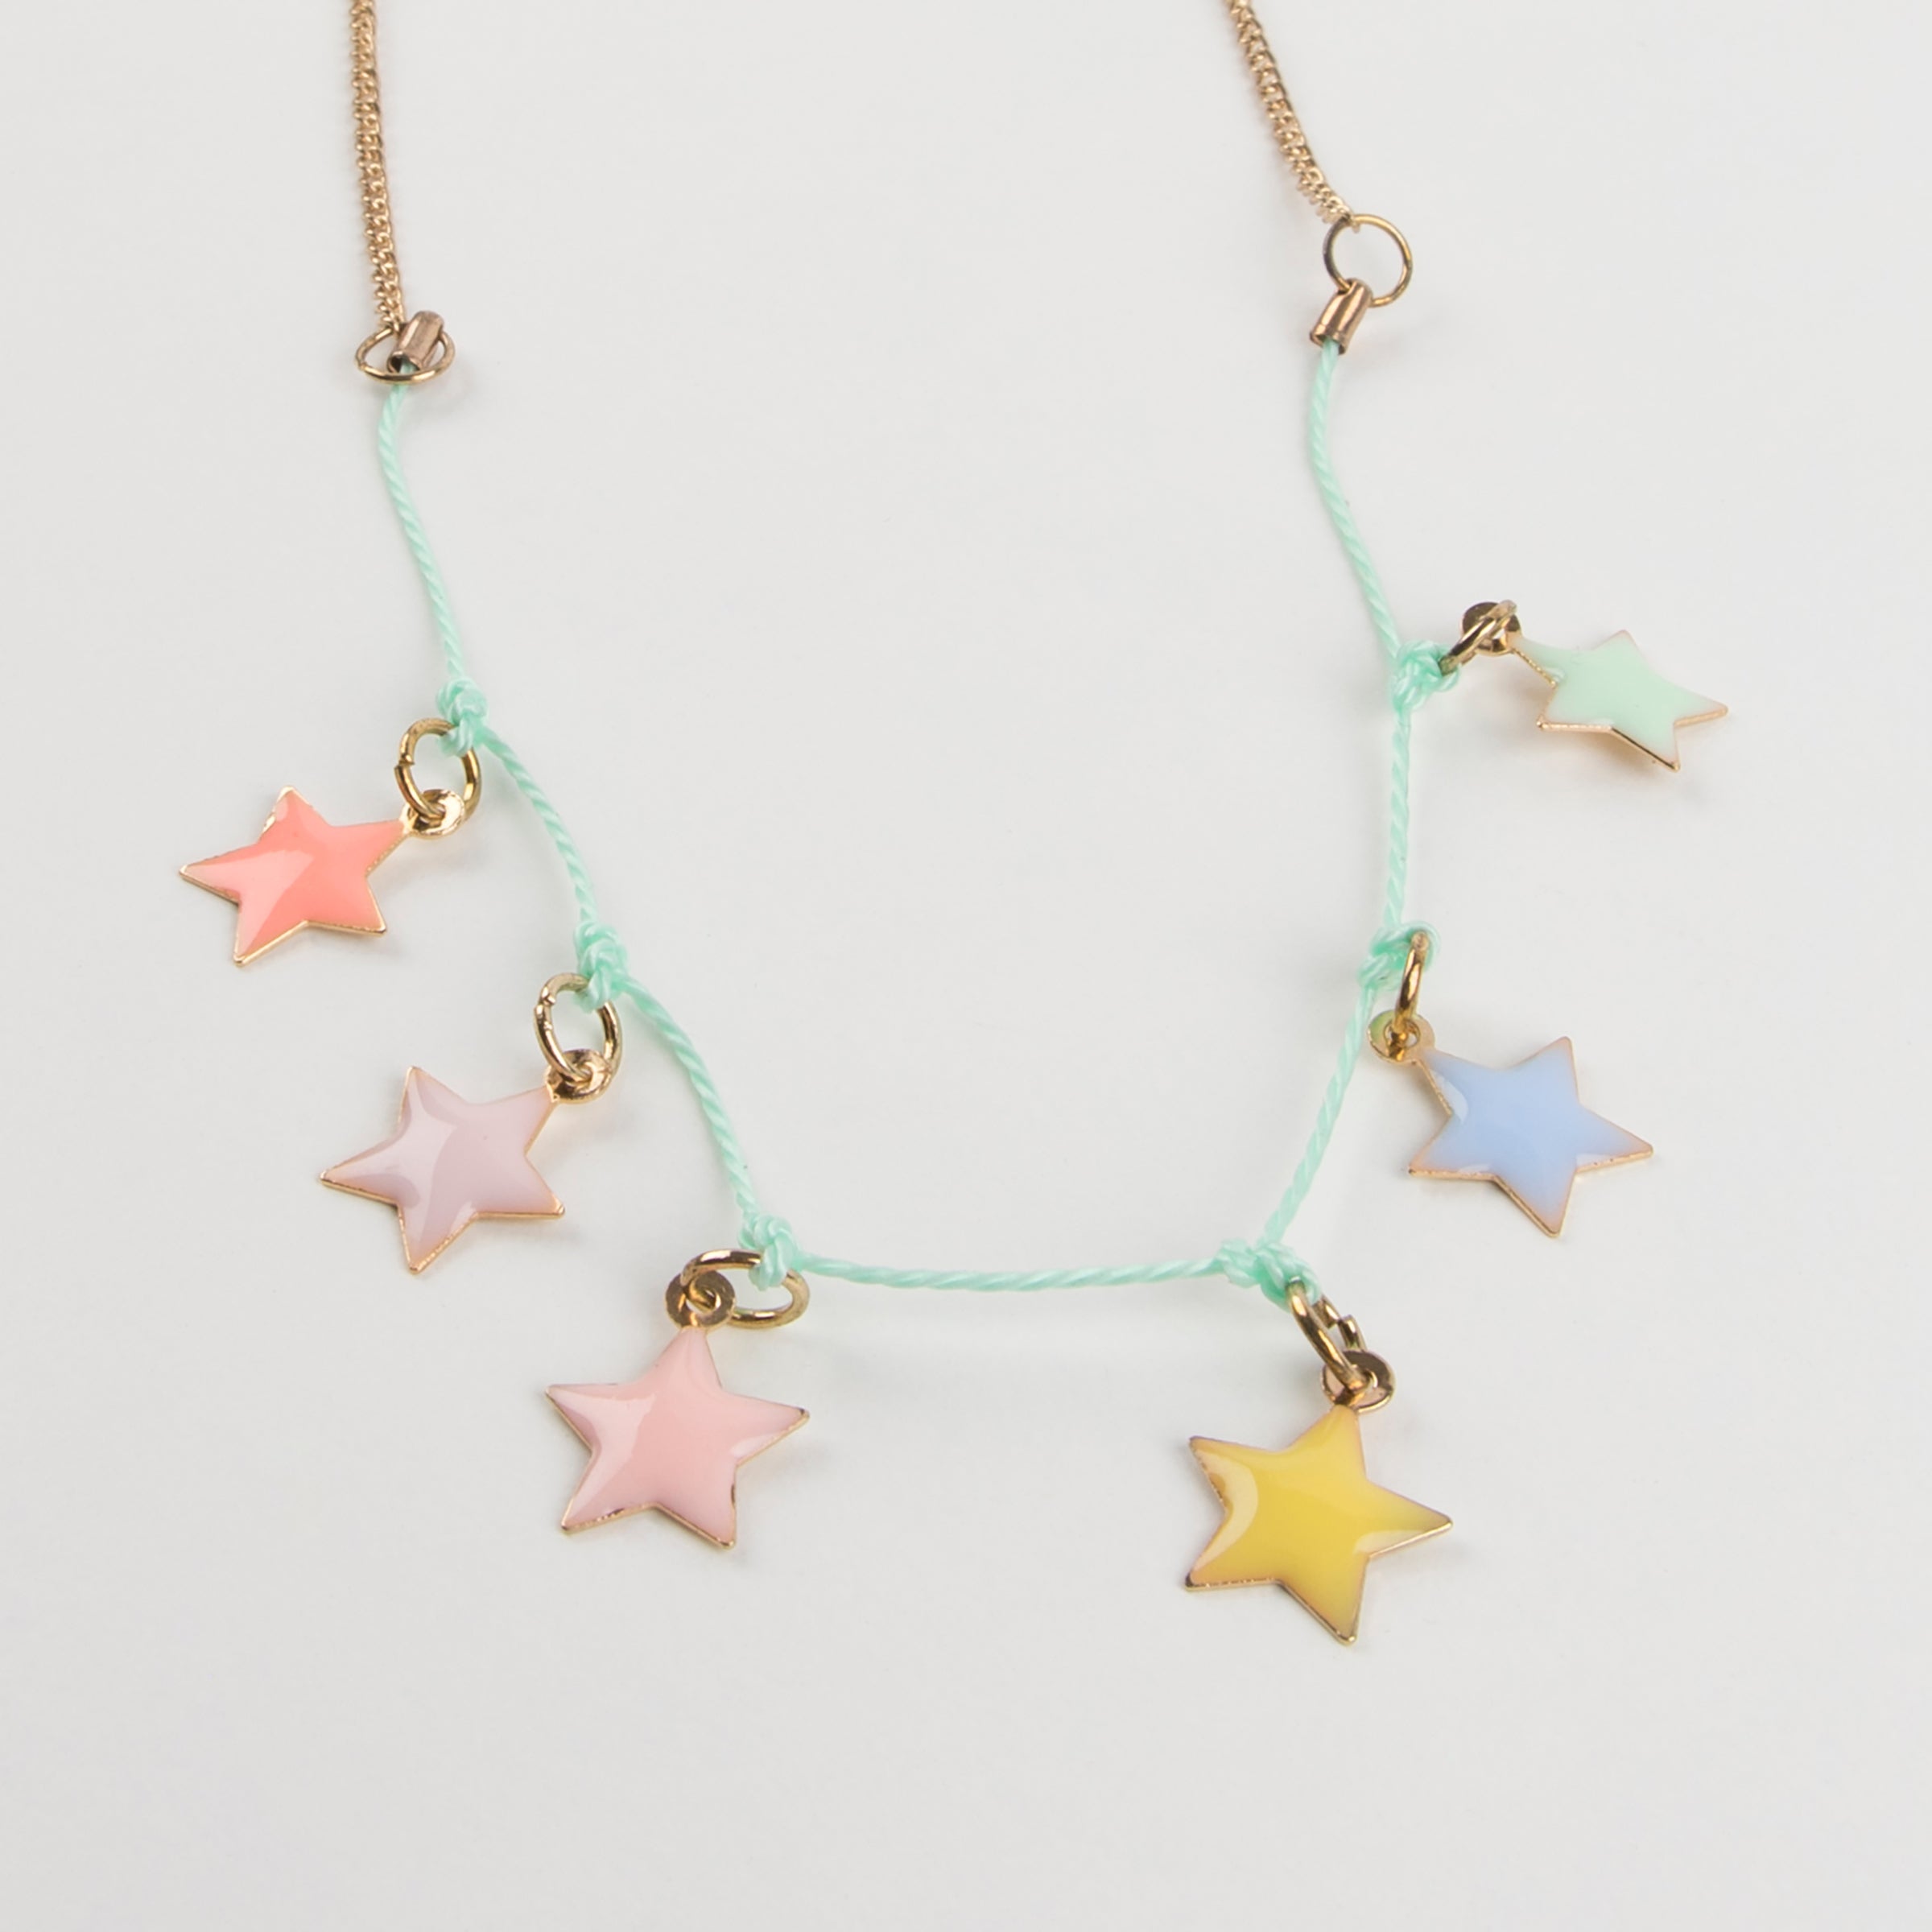 Our fabulous Christmas necklace, with enamel stars, is a wonderful Christmas accessory.